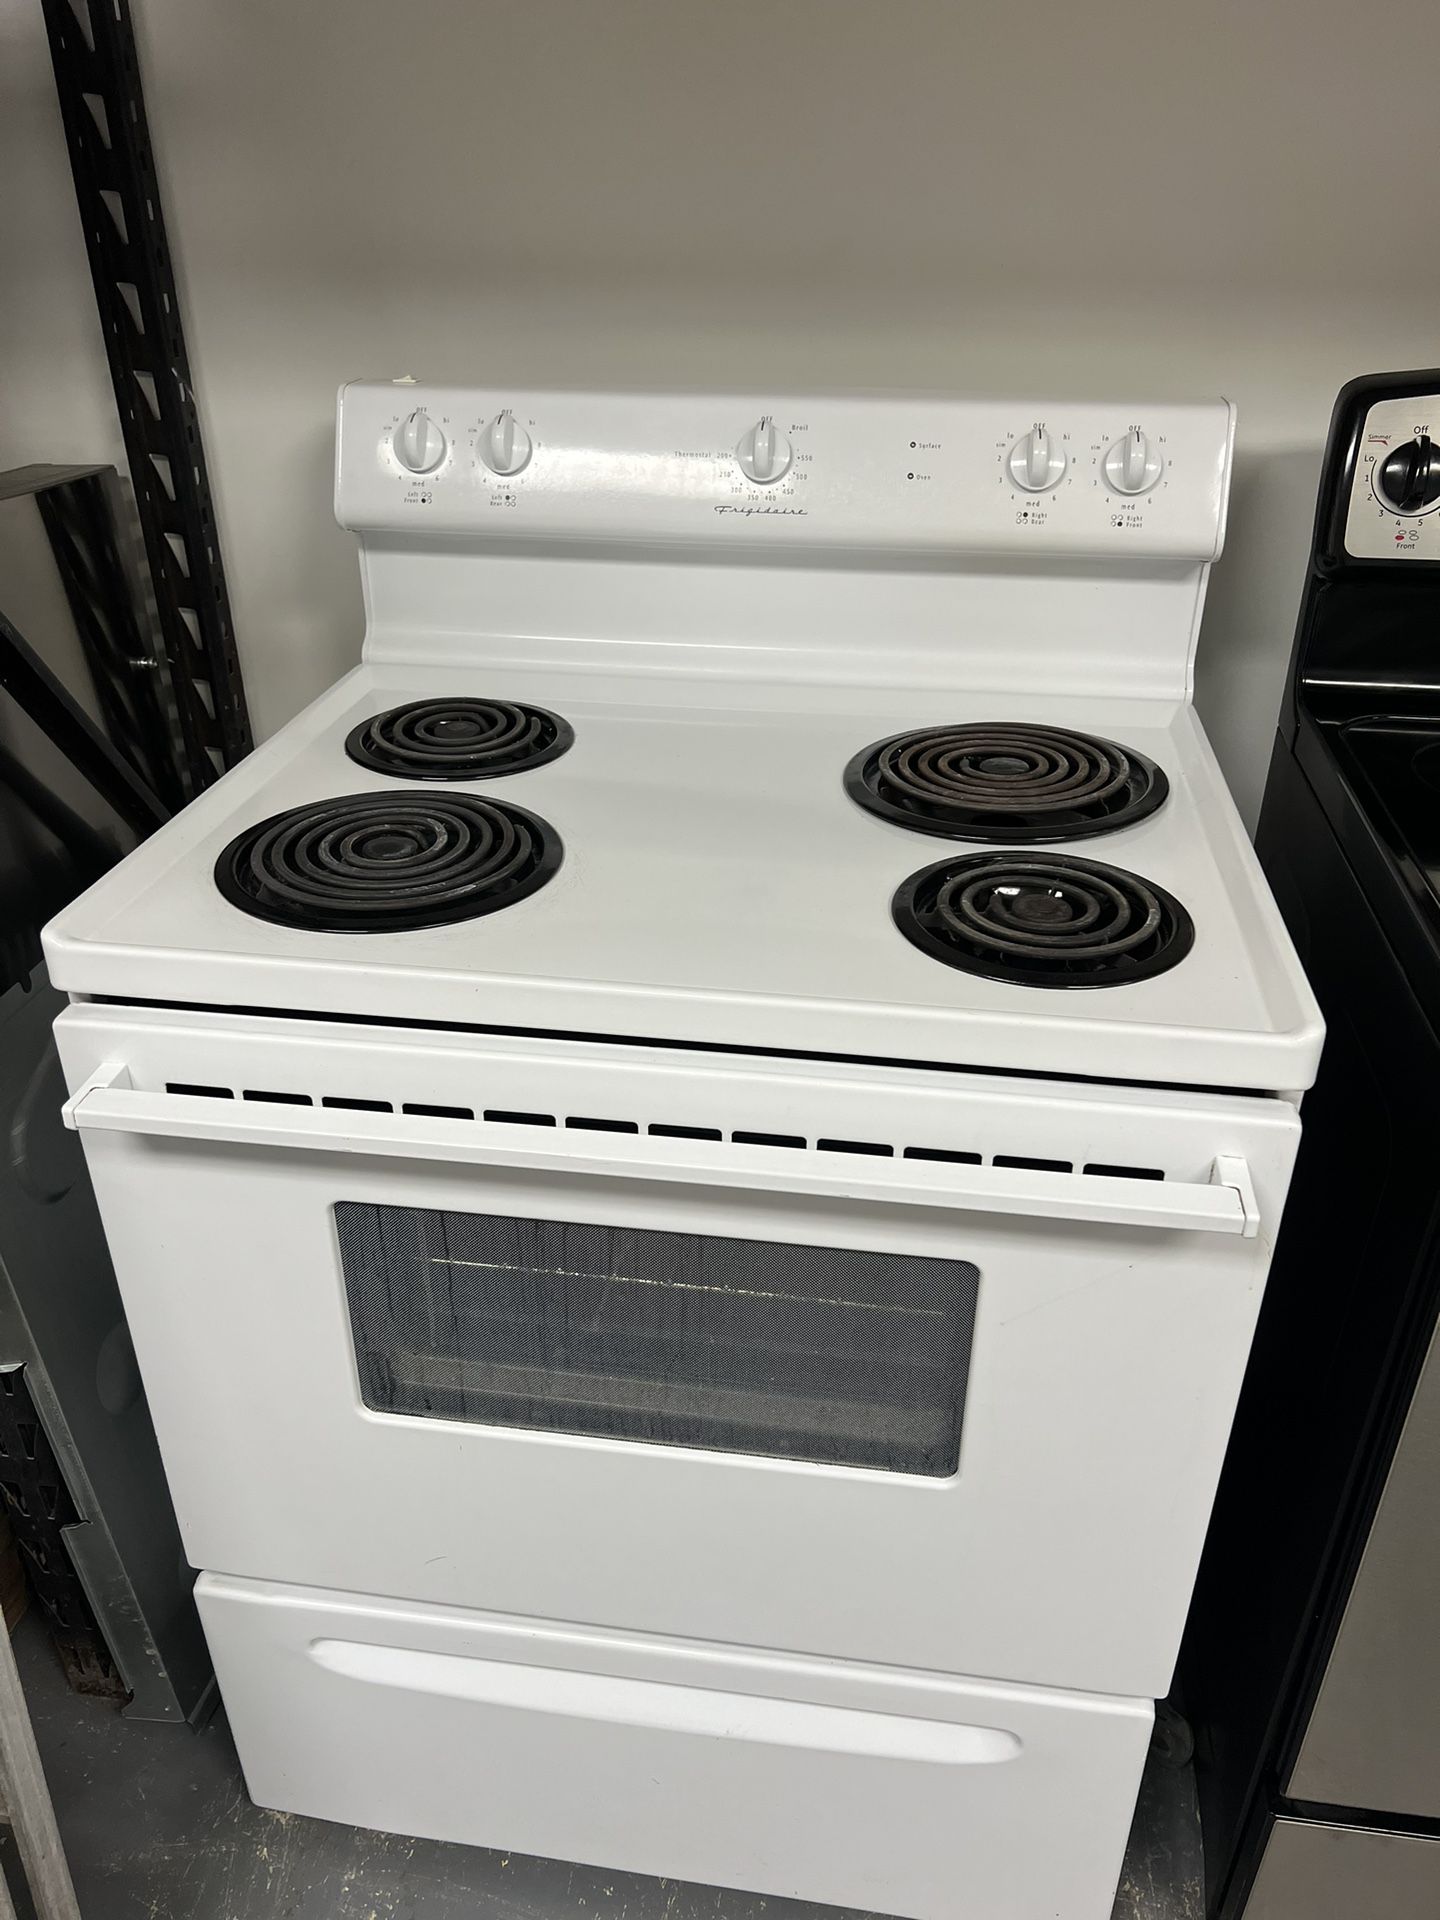 Electric Stove 30 “ Wides 